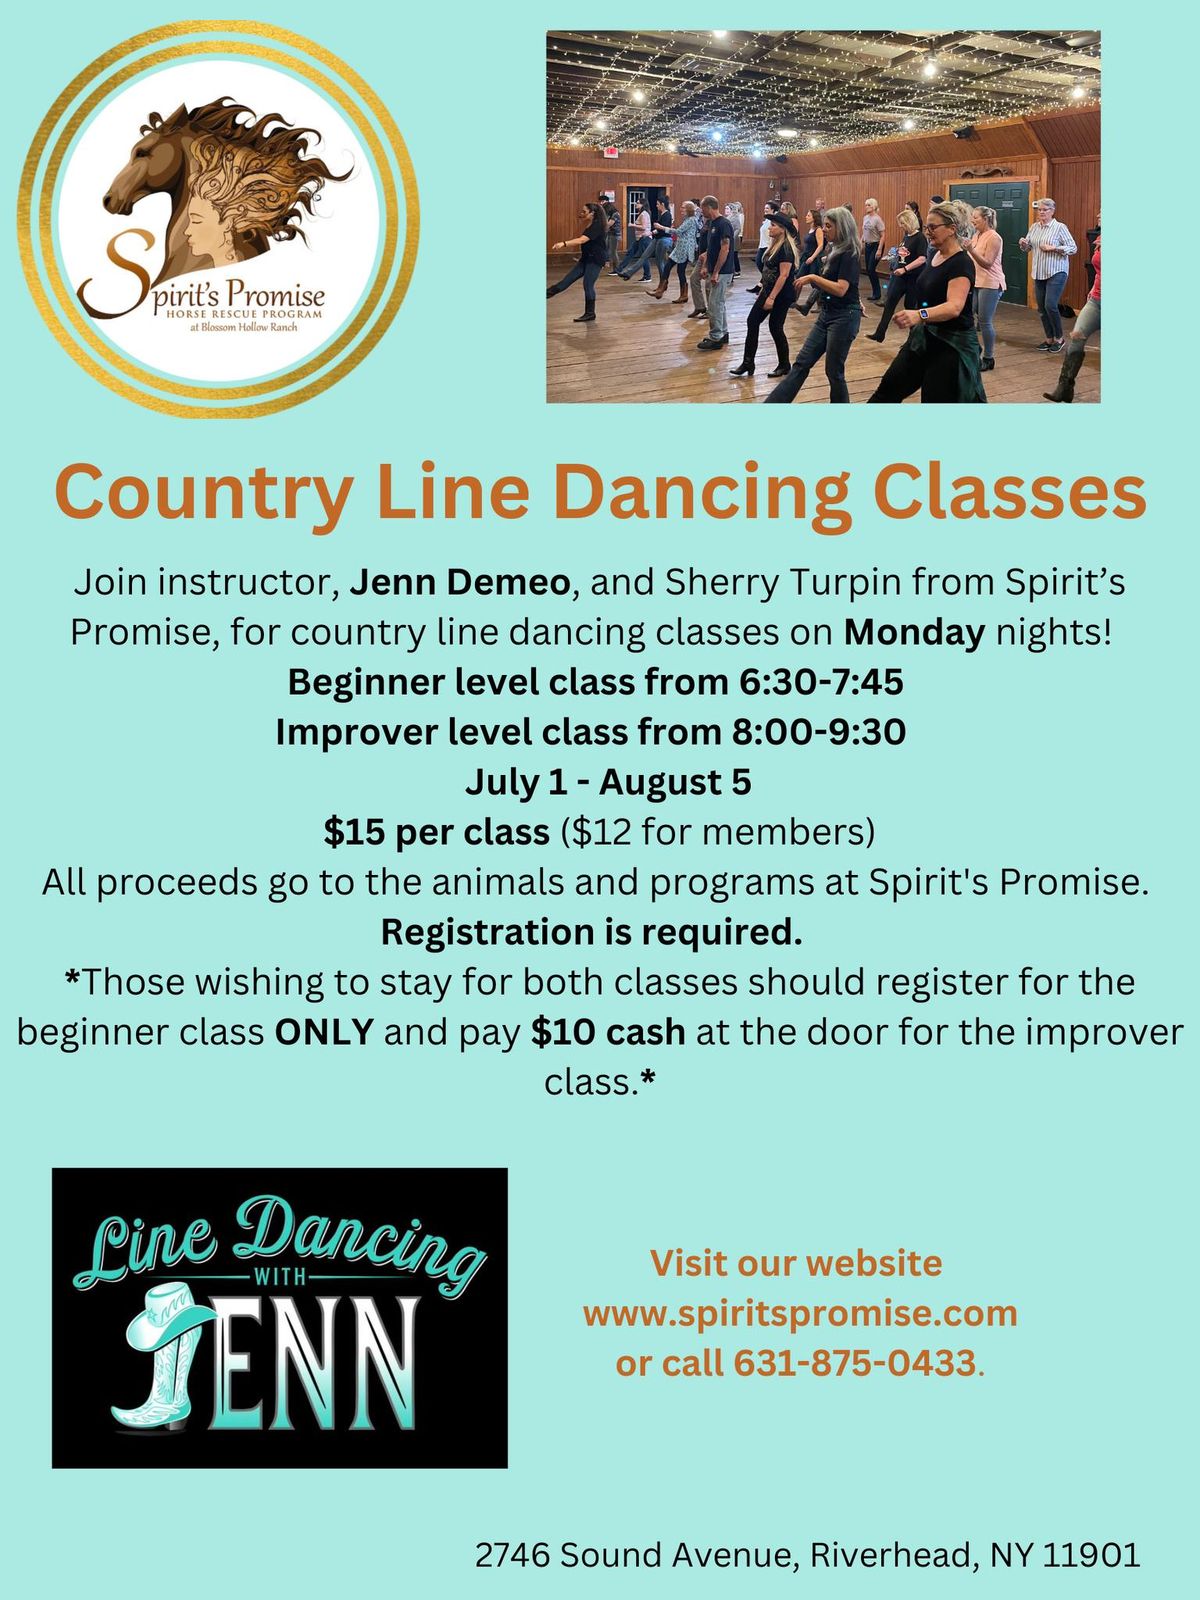 Country Line Dancing Classes with Jenn